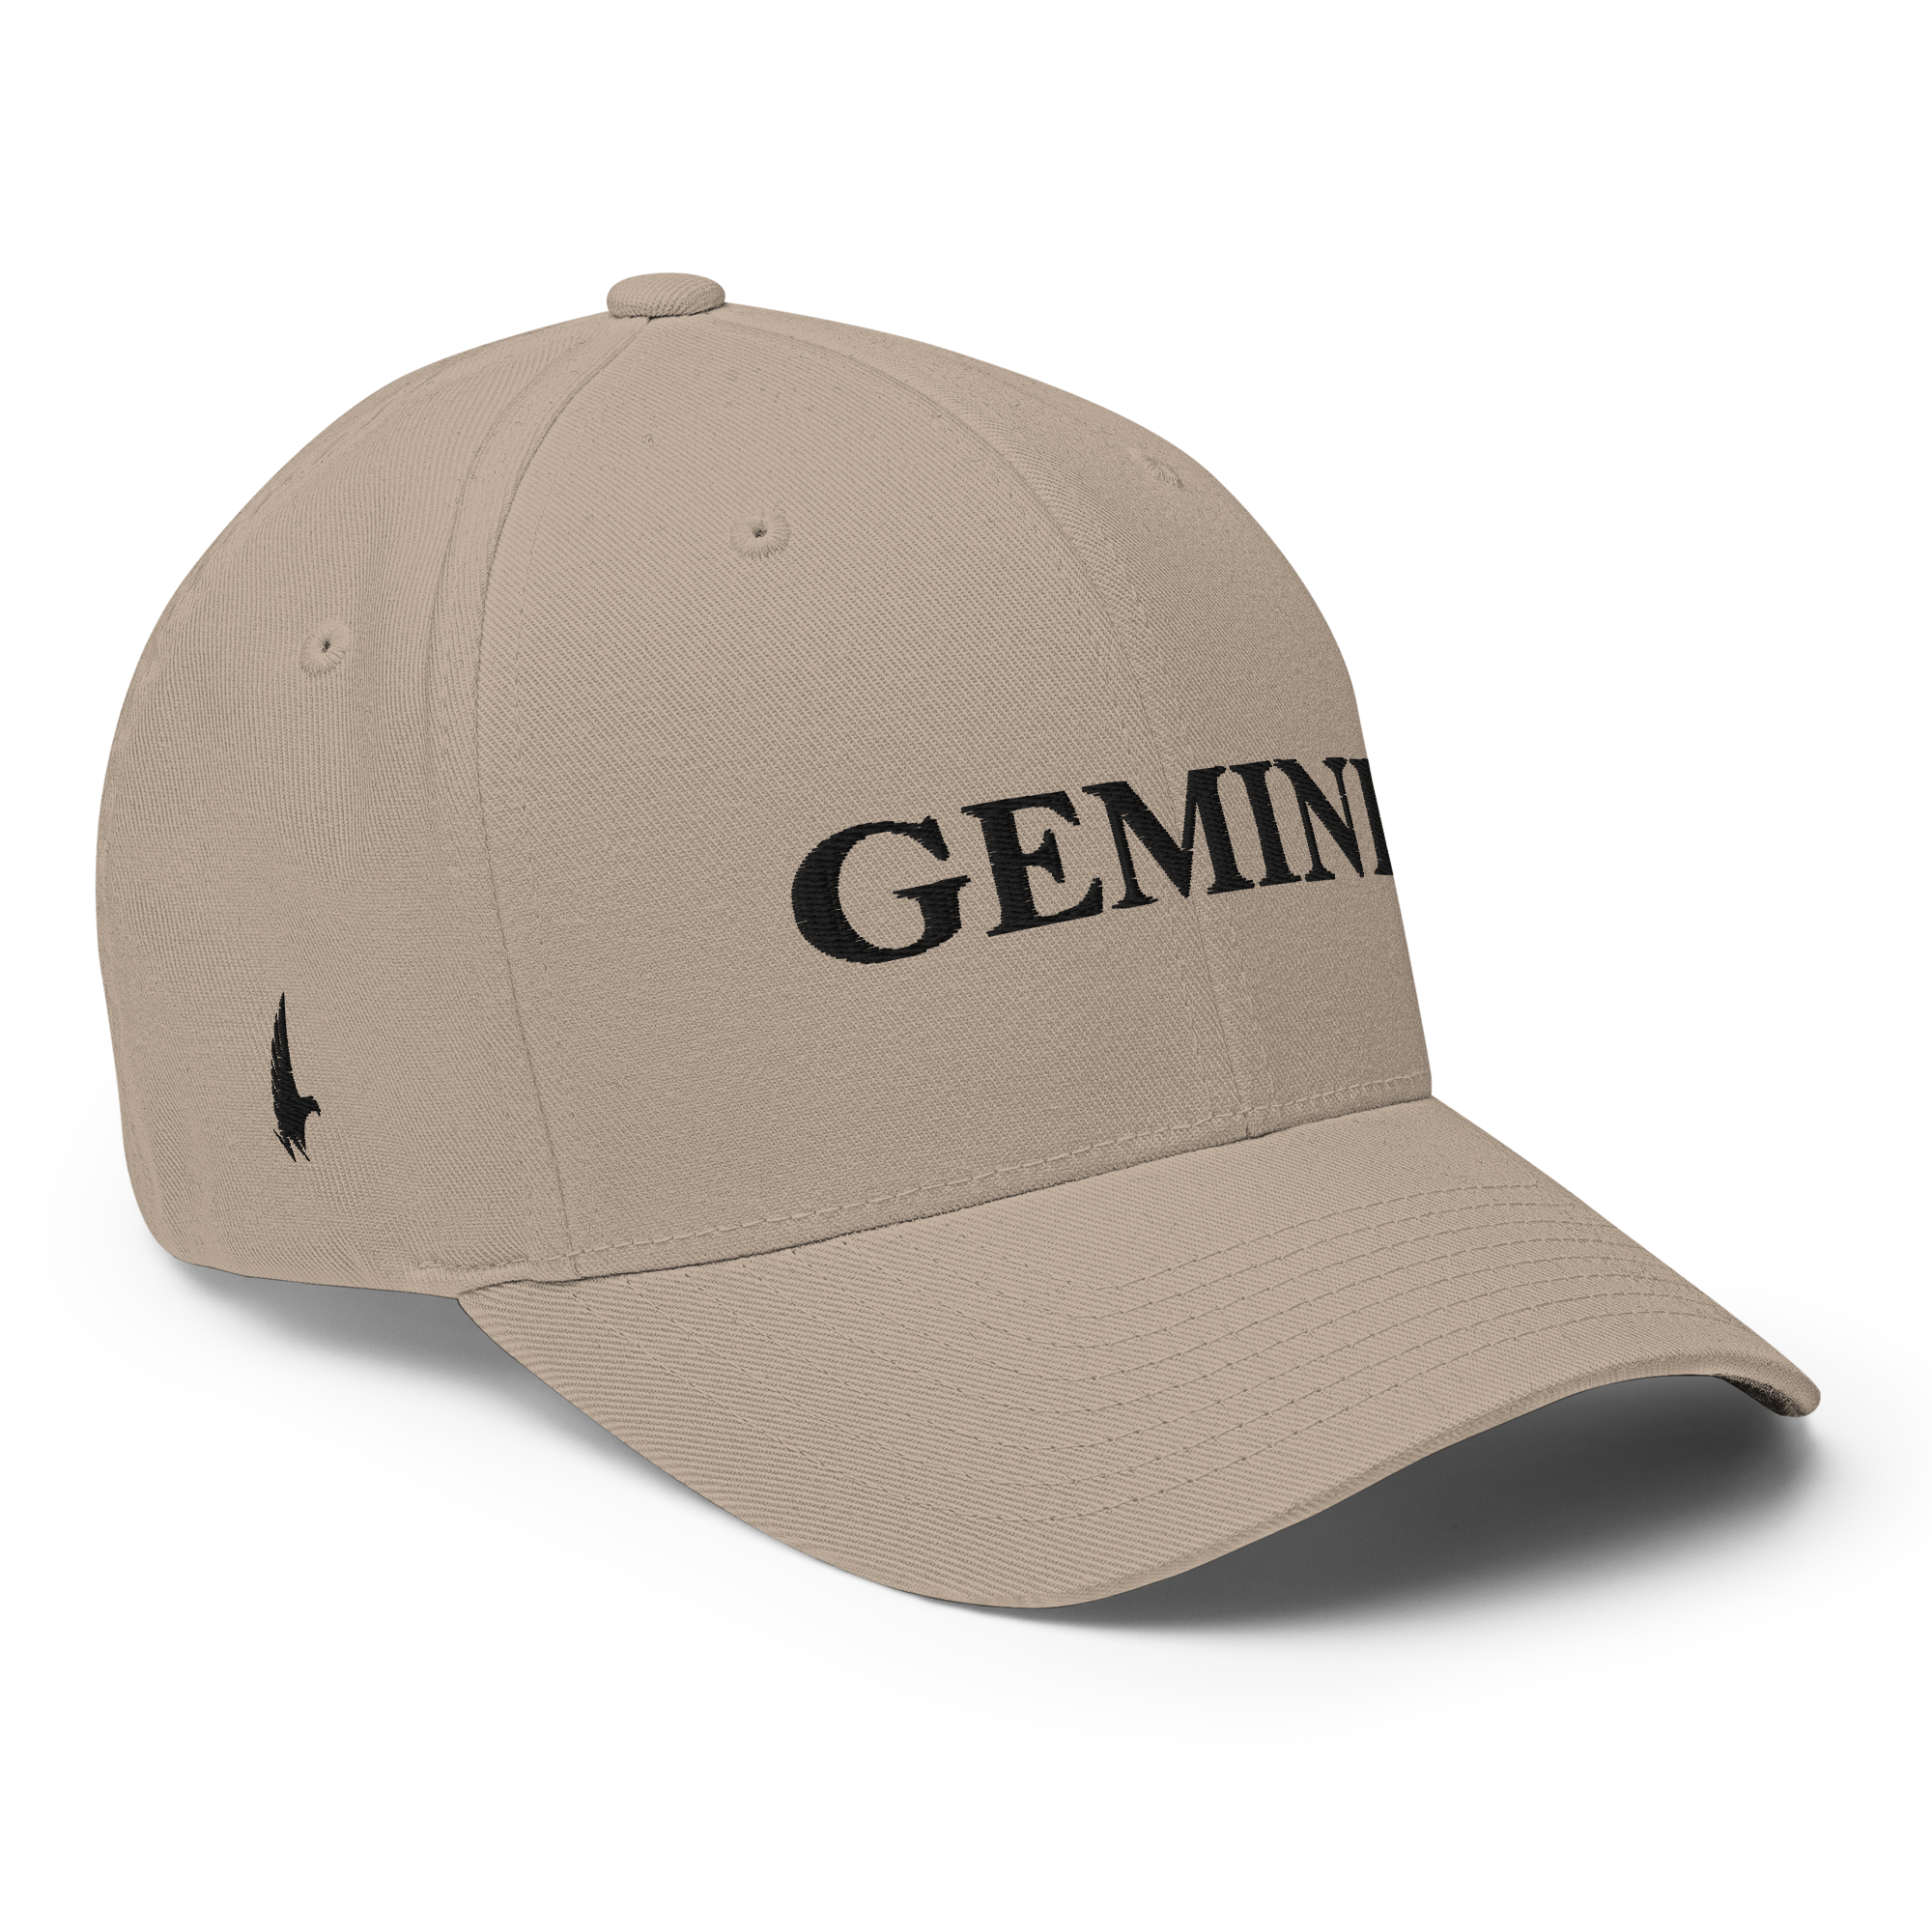 Original Gemini Fitted Hat Sandstone Black Fitted - Loyalty Vibes